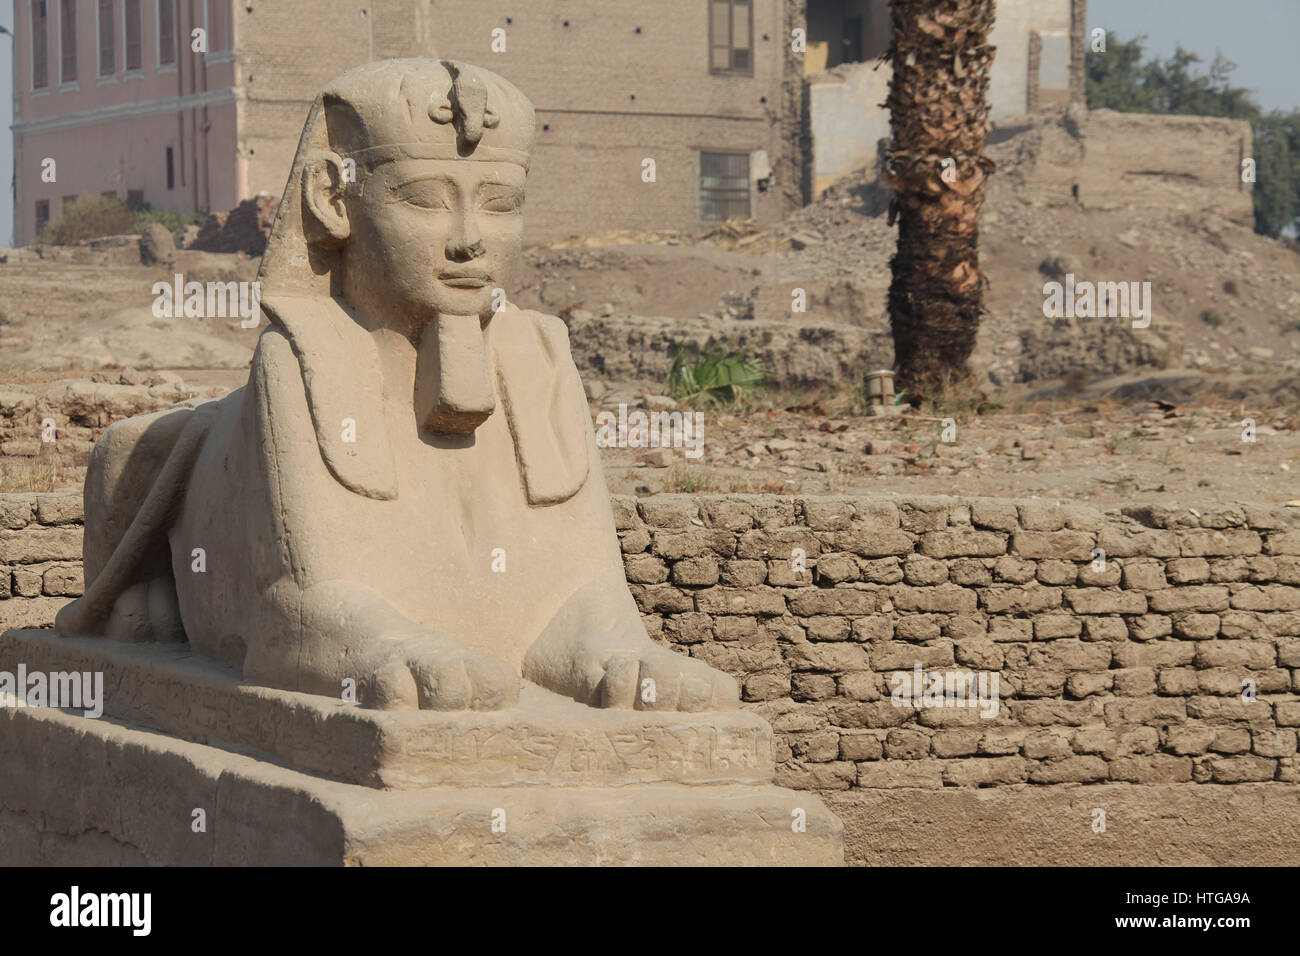 Avenue of Sphinxes at the Luxor Temple complex in Egypt Stock Photo